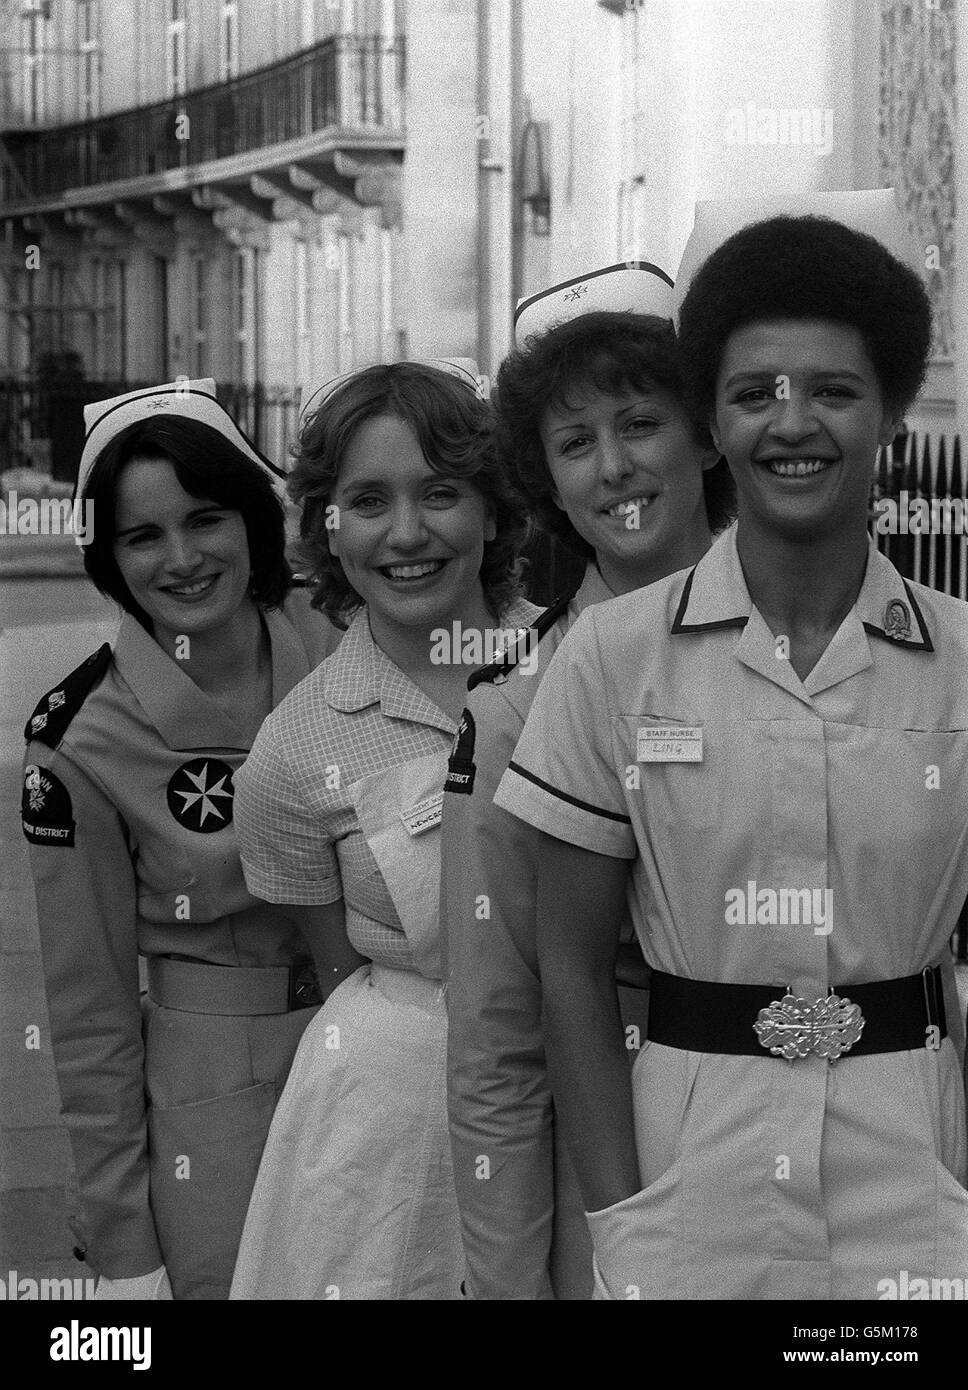 PA PHOTOS 23/10/1979 Real-life St. John nurses from left to right: Linda Dominguez and Sheila Jackson are joined by actresses Joanna Monro amd Angela Bruce, (far right) who star as nurses in the BBC series 'Angels' to launch the St. John Year of Nursing 1980, in London Stock Photo